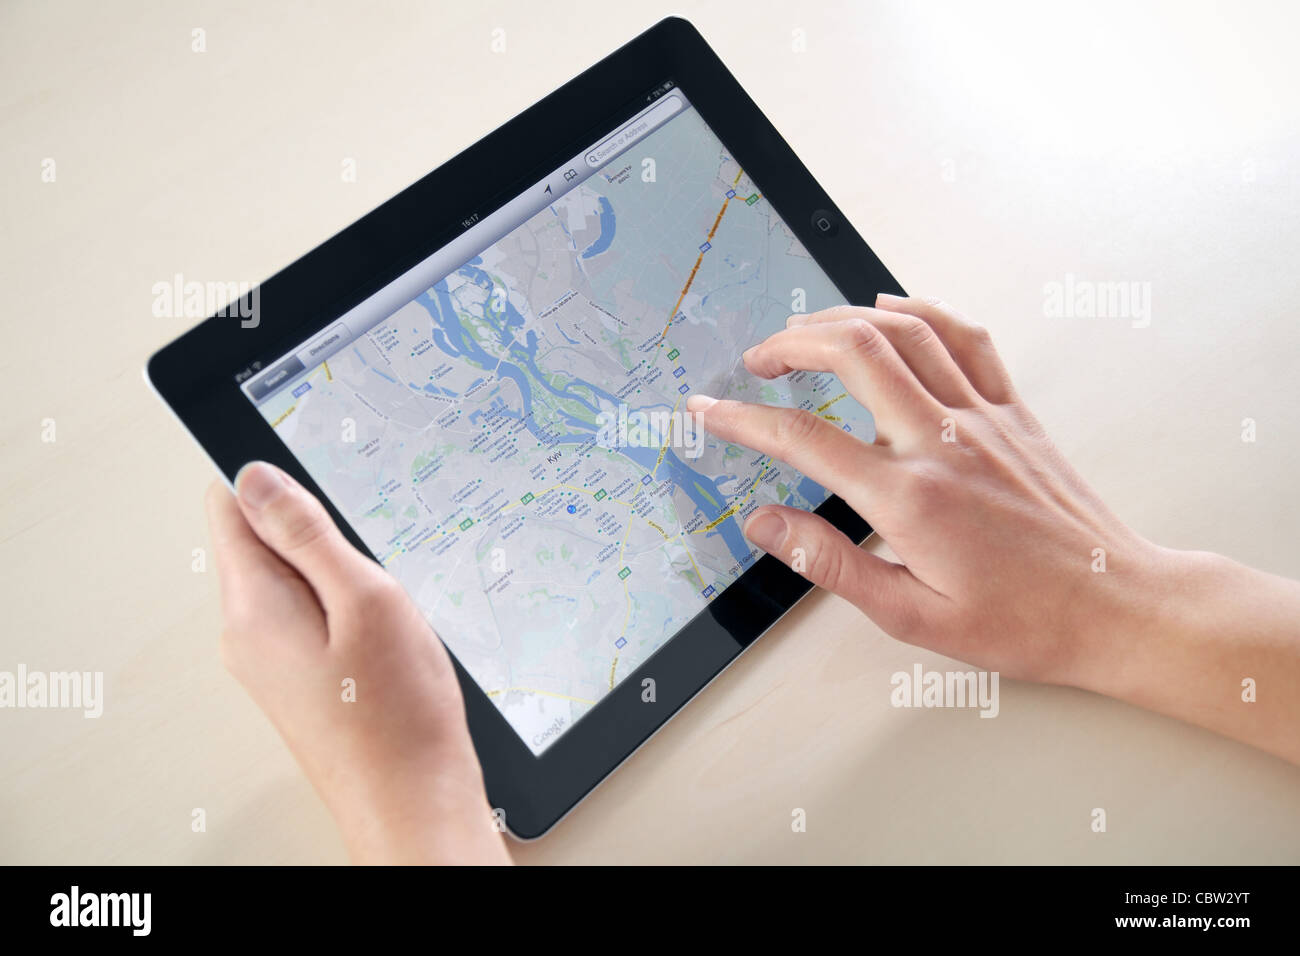 Woman hands holding and touching on Apple iPad2 with Google Maps application on a screen. Stock Photo